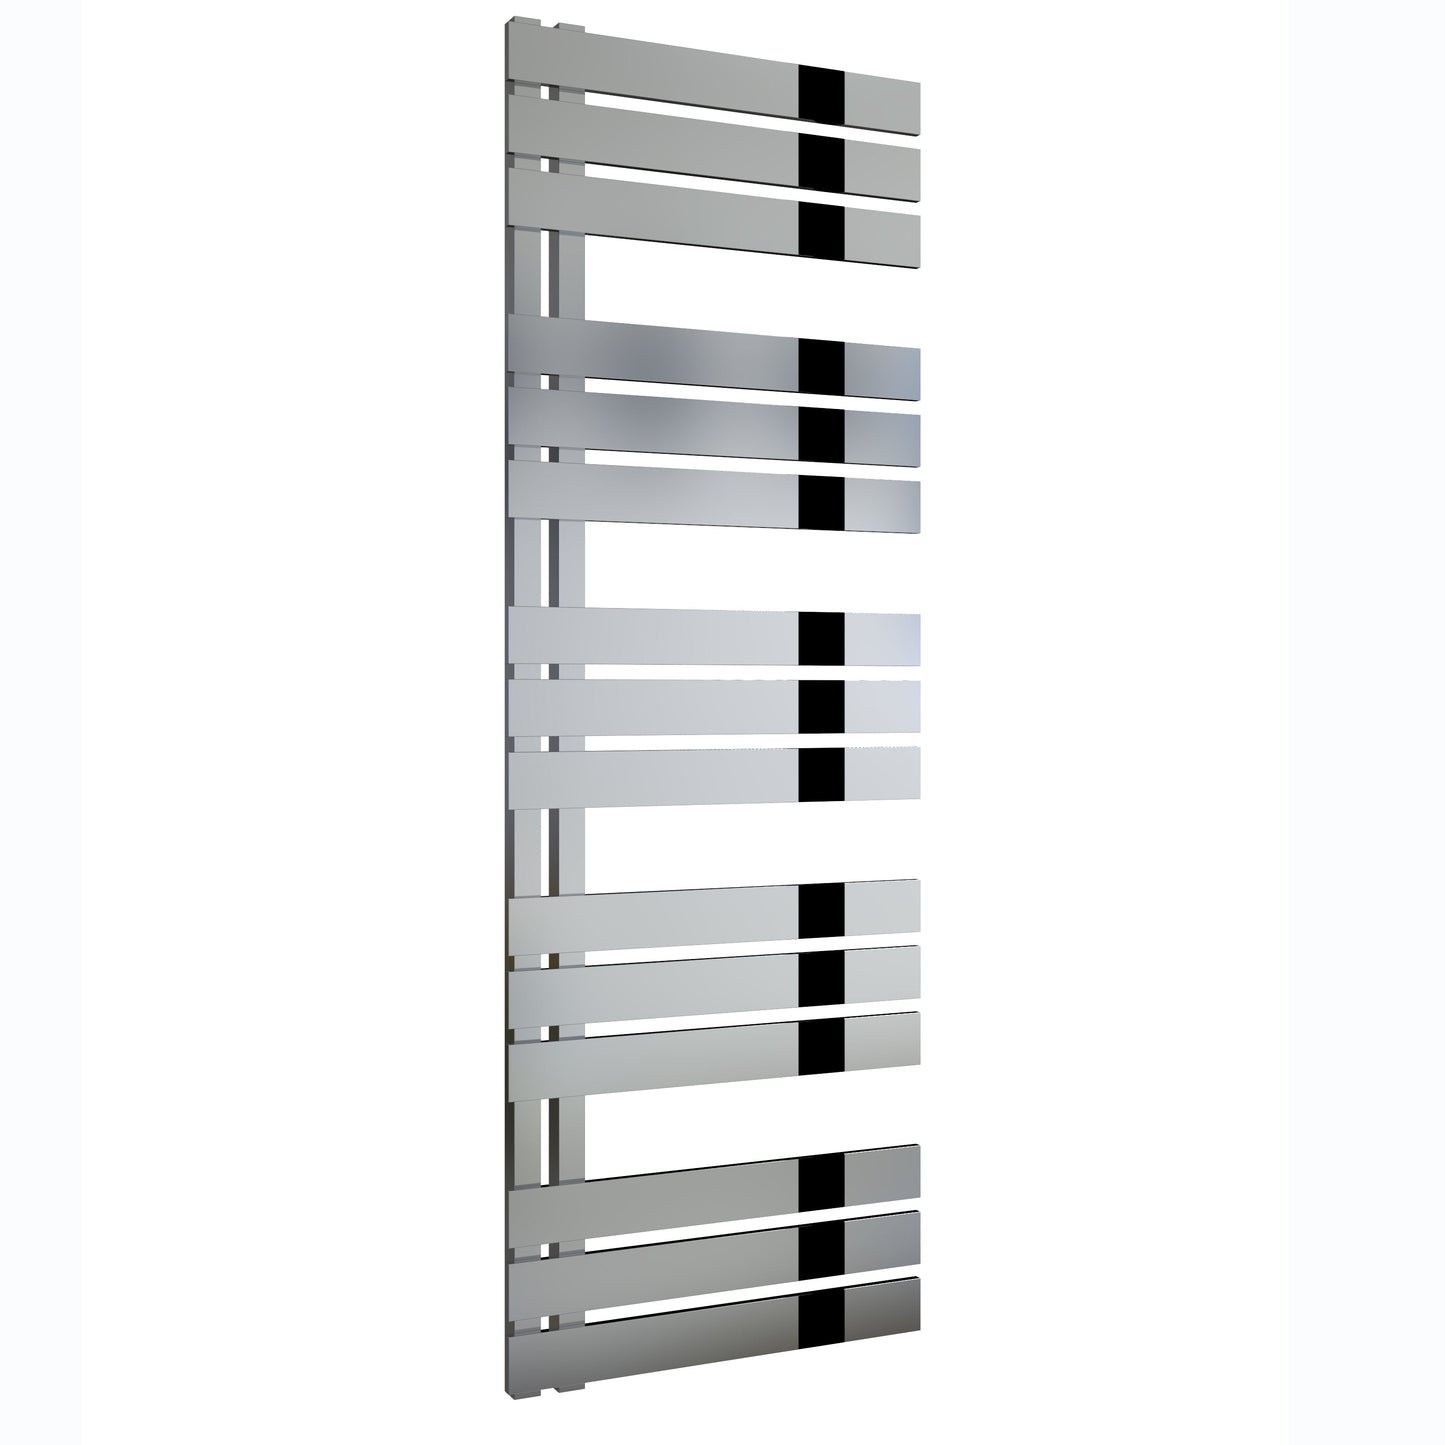 Ricadi Electric Stainless Steel Heated Towel Rail - Various Sizes - Polished Stainless Steel